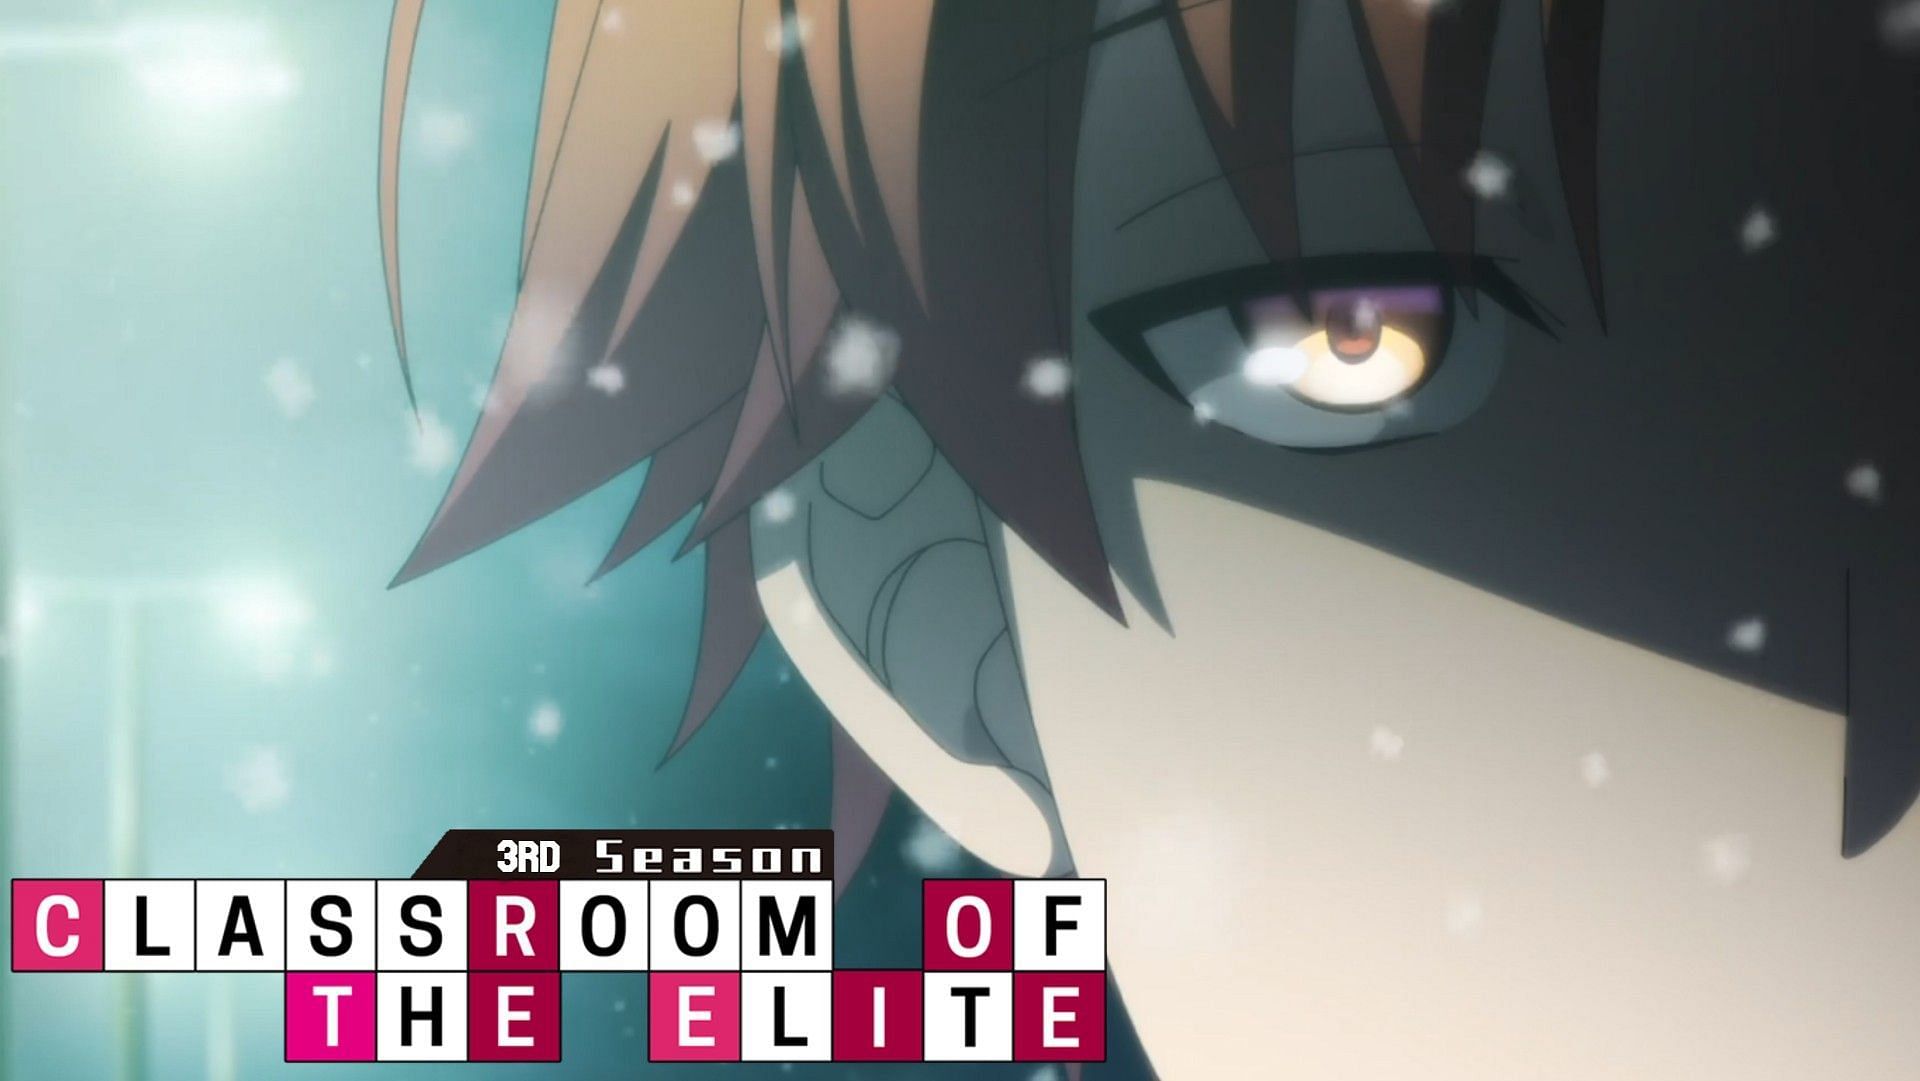 Classroom of the Elite season 3 is scheduled to be released in 2023